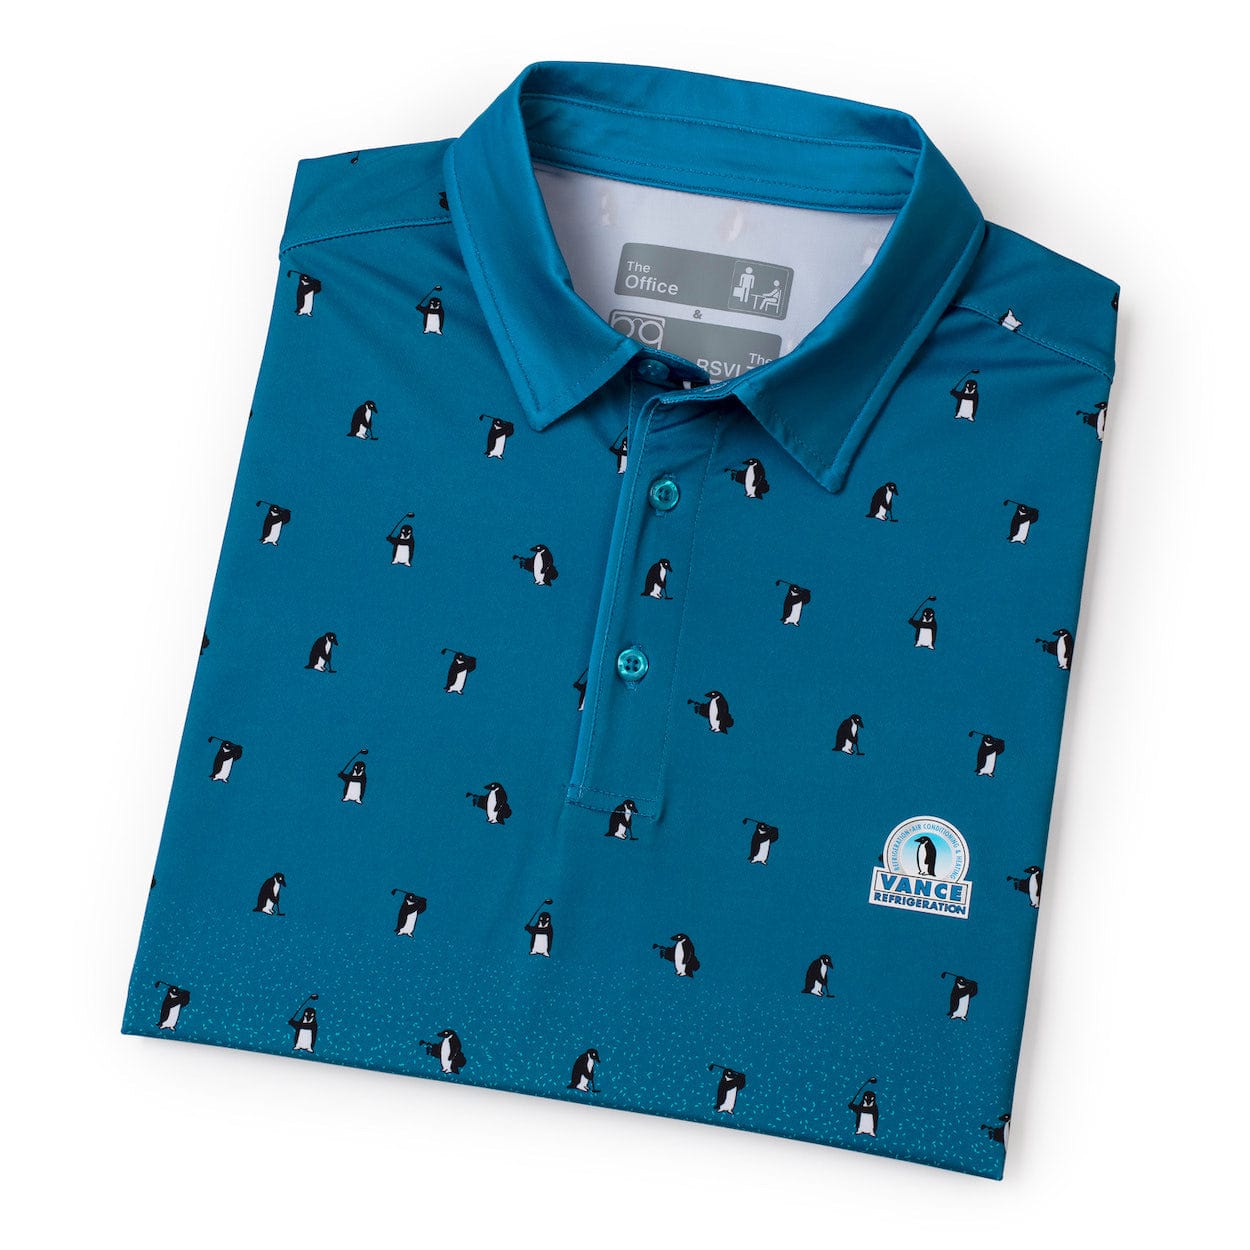 The Office Vance Refrigeration – All-Day Polo